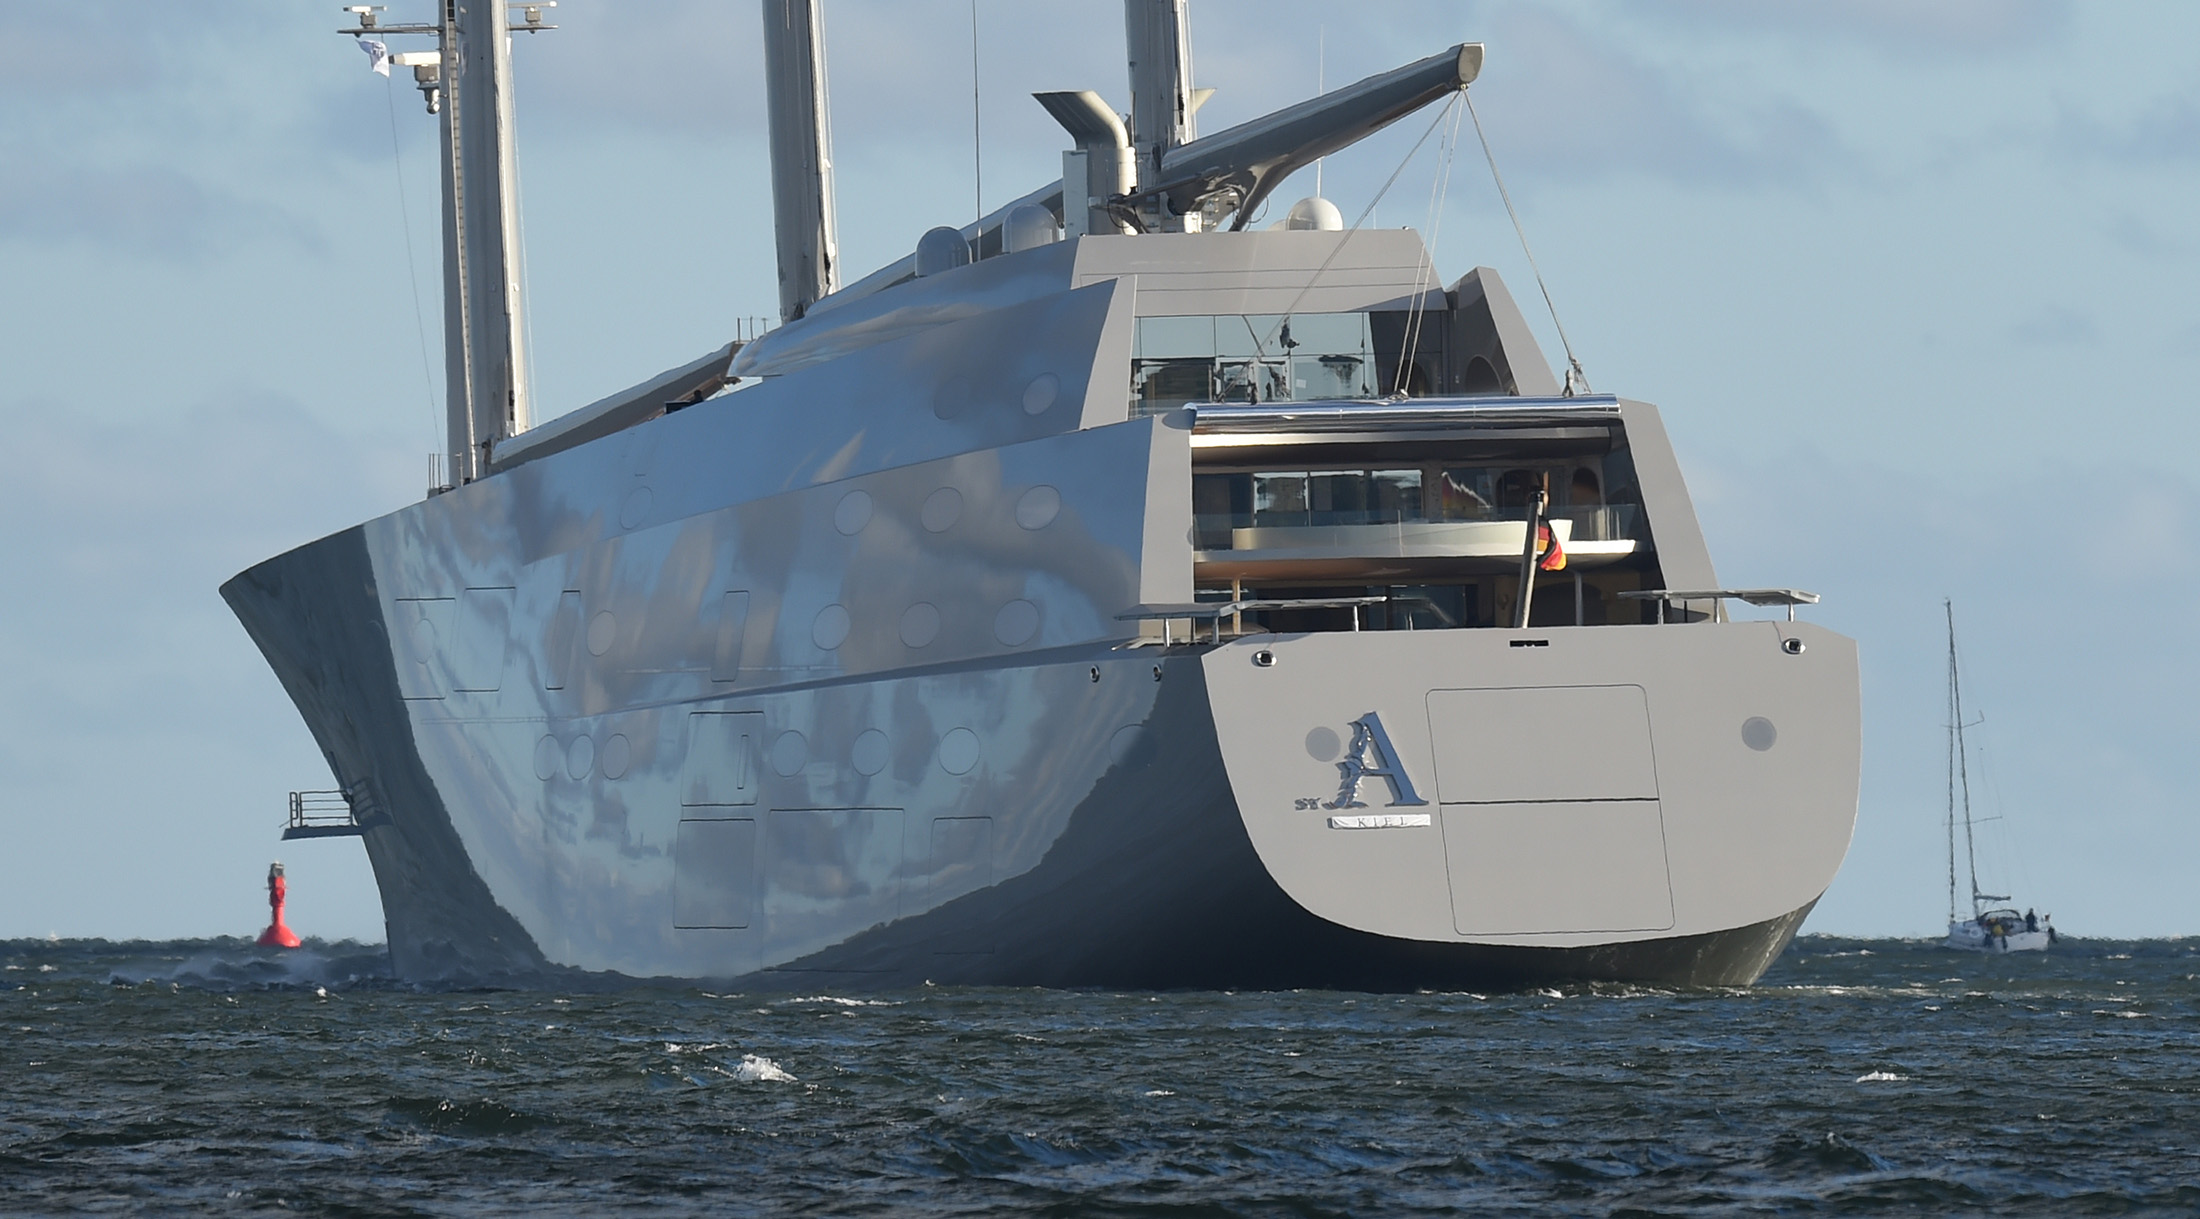 Superyachtfan - The yacht Steel is in Gibraltar We are